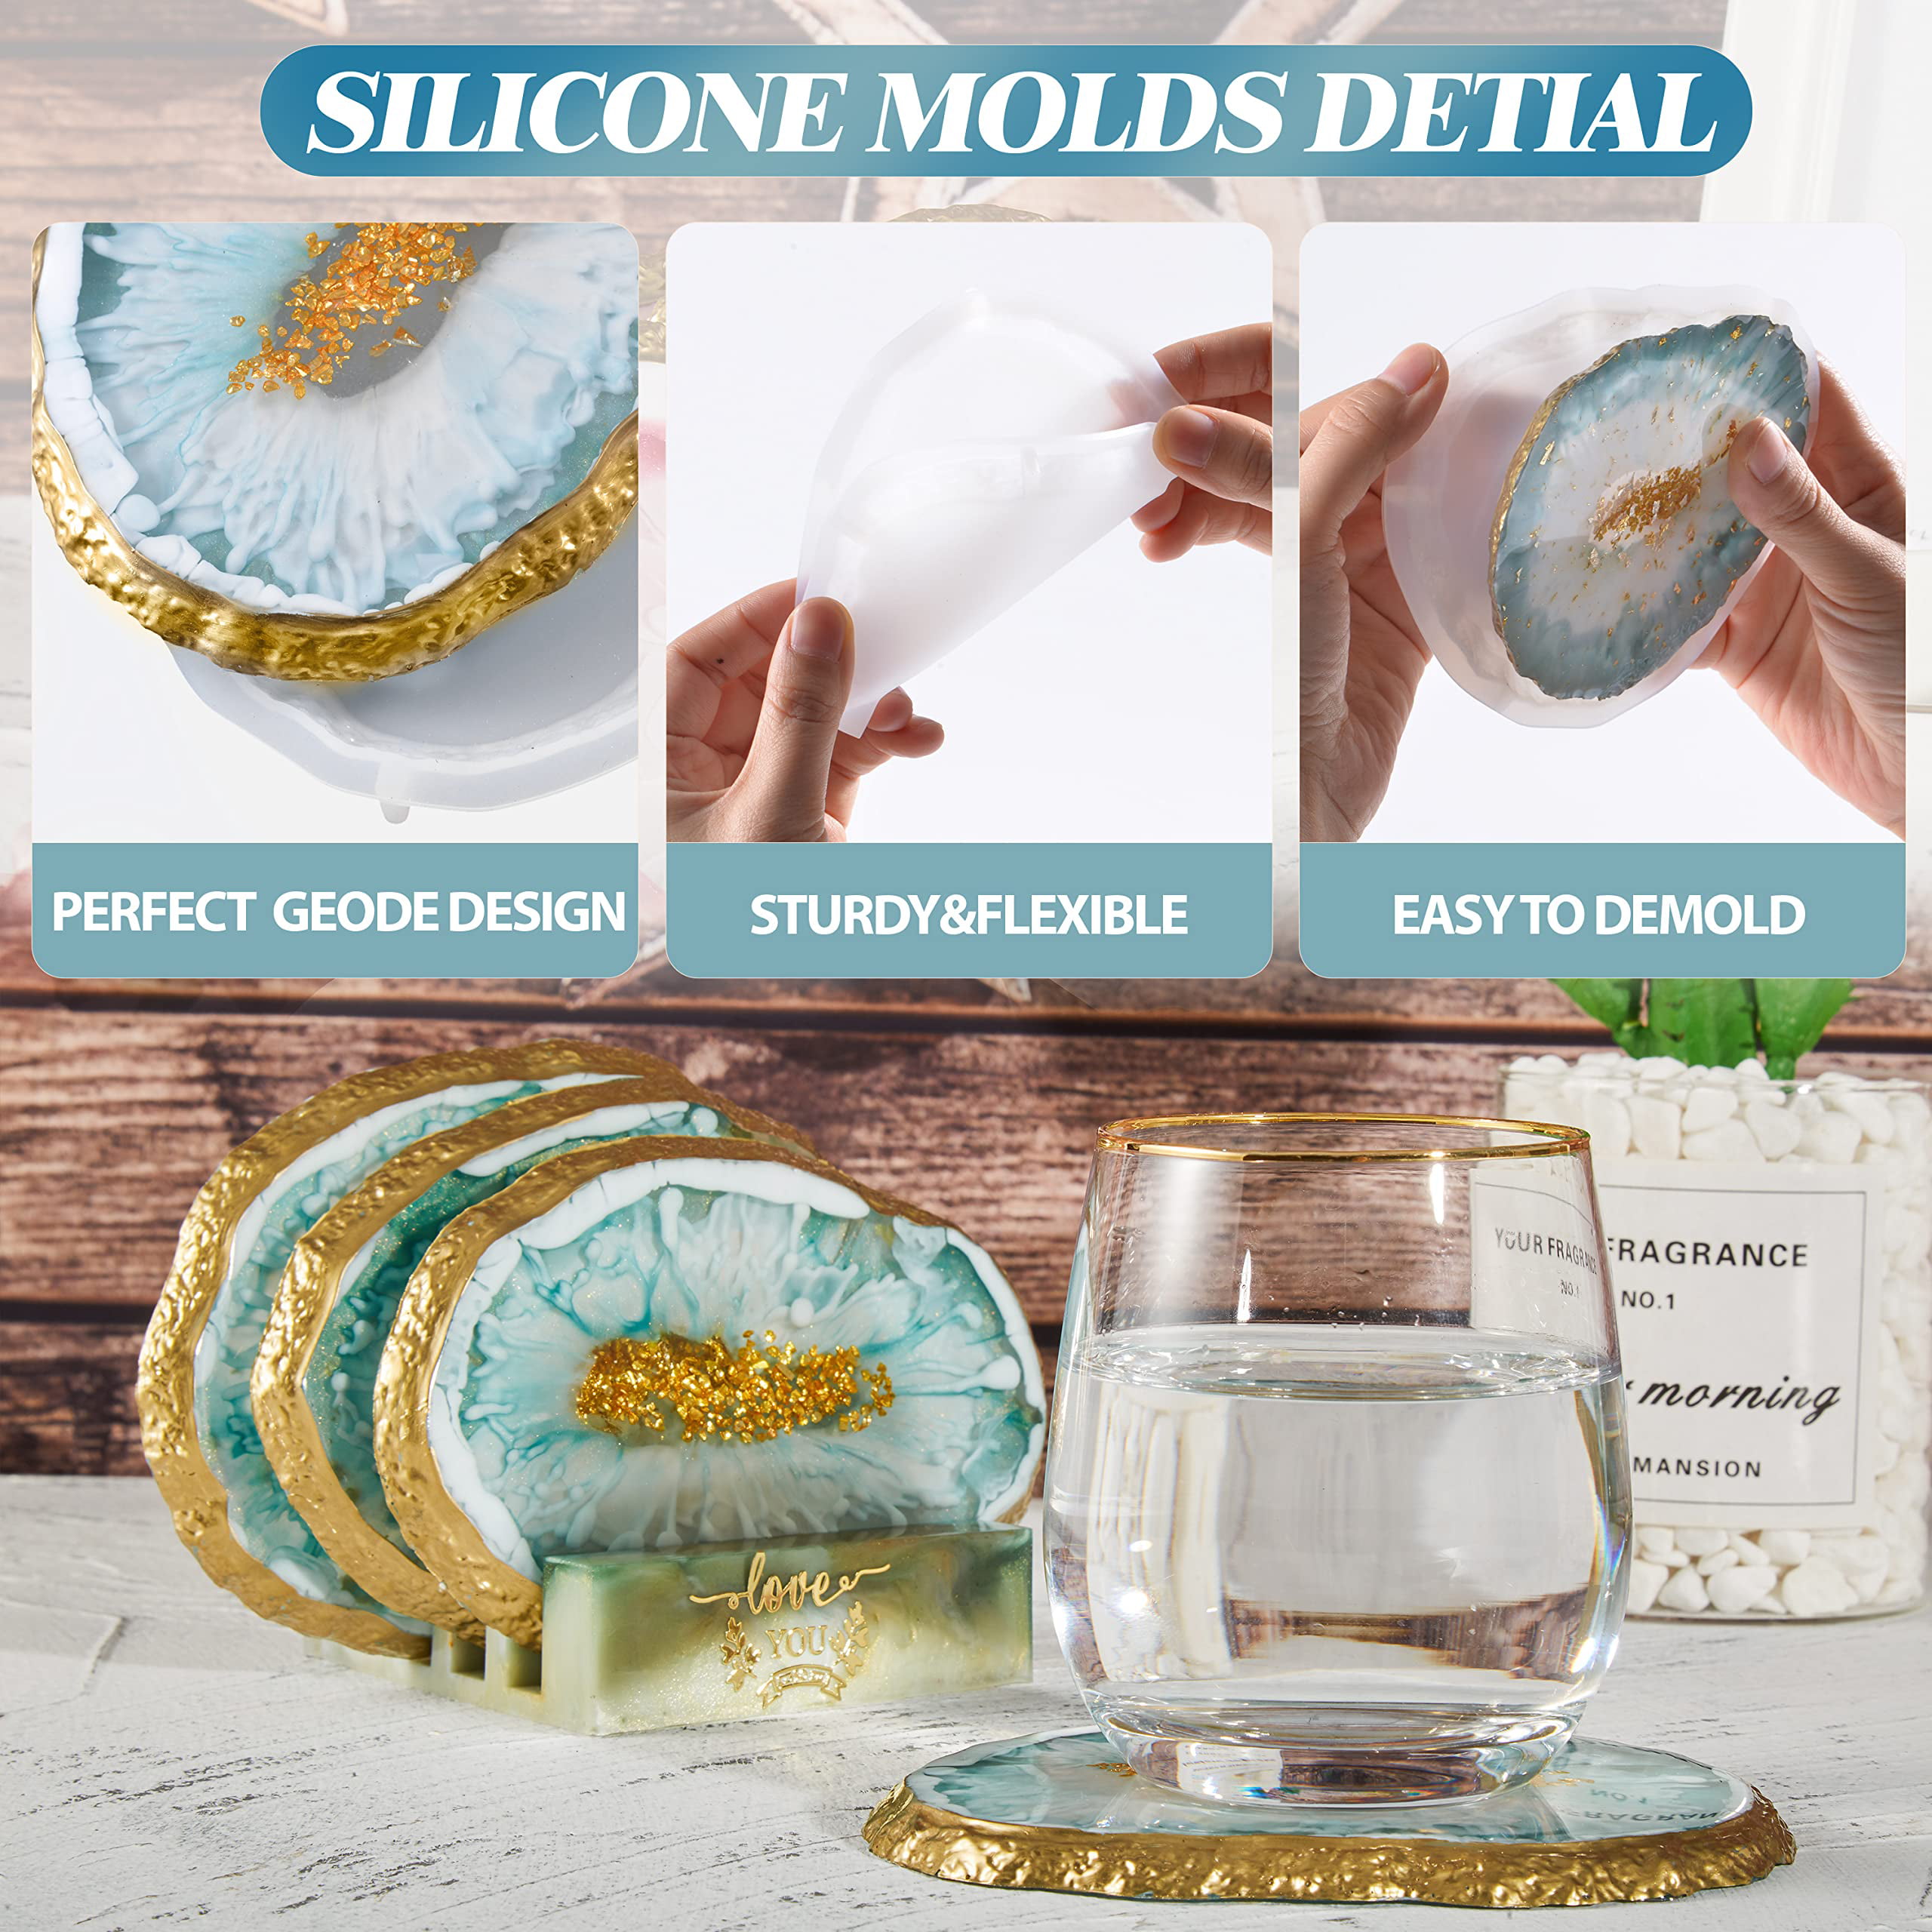 IESCOO Resin Coaster Molds for Epoxy Resin,4pcs Geode Coaster Mold with Holder Mold,Silicone Coaster Molds for Resin Casting